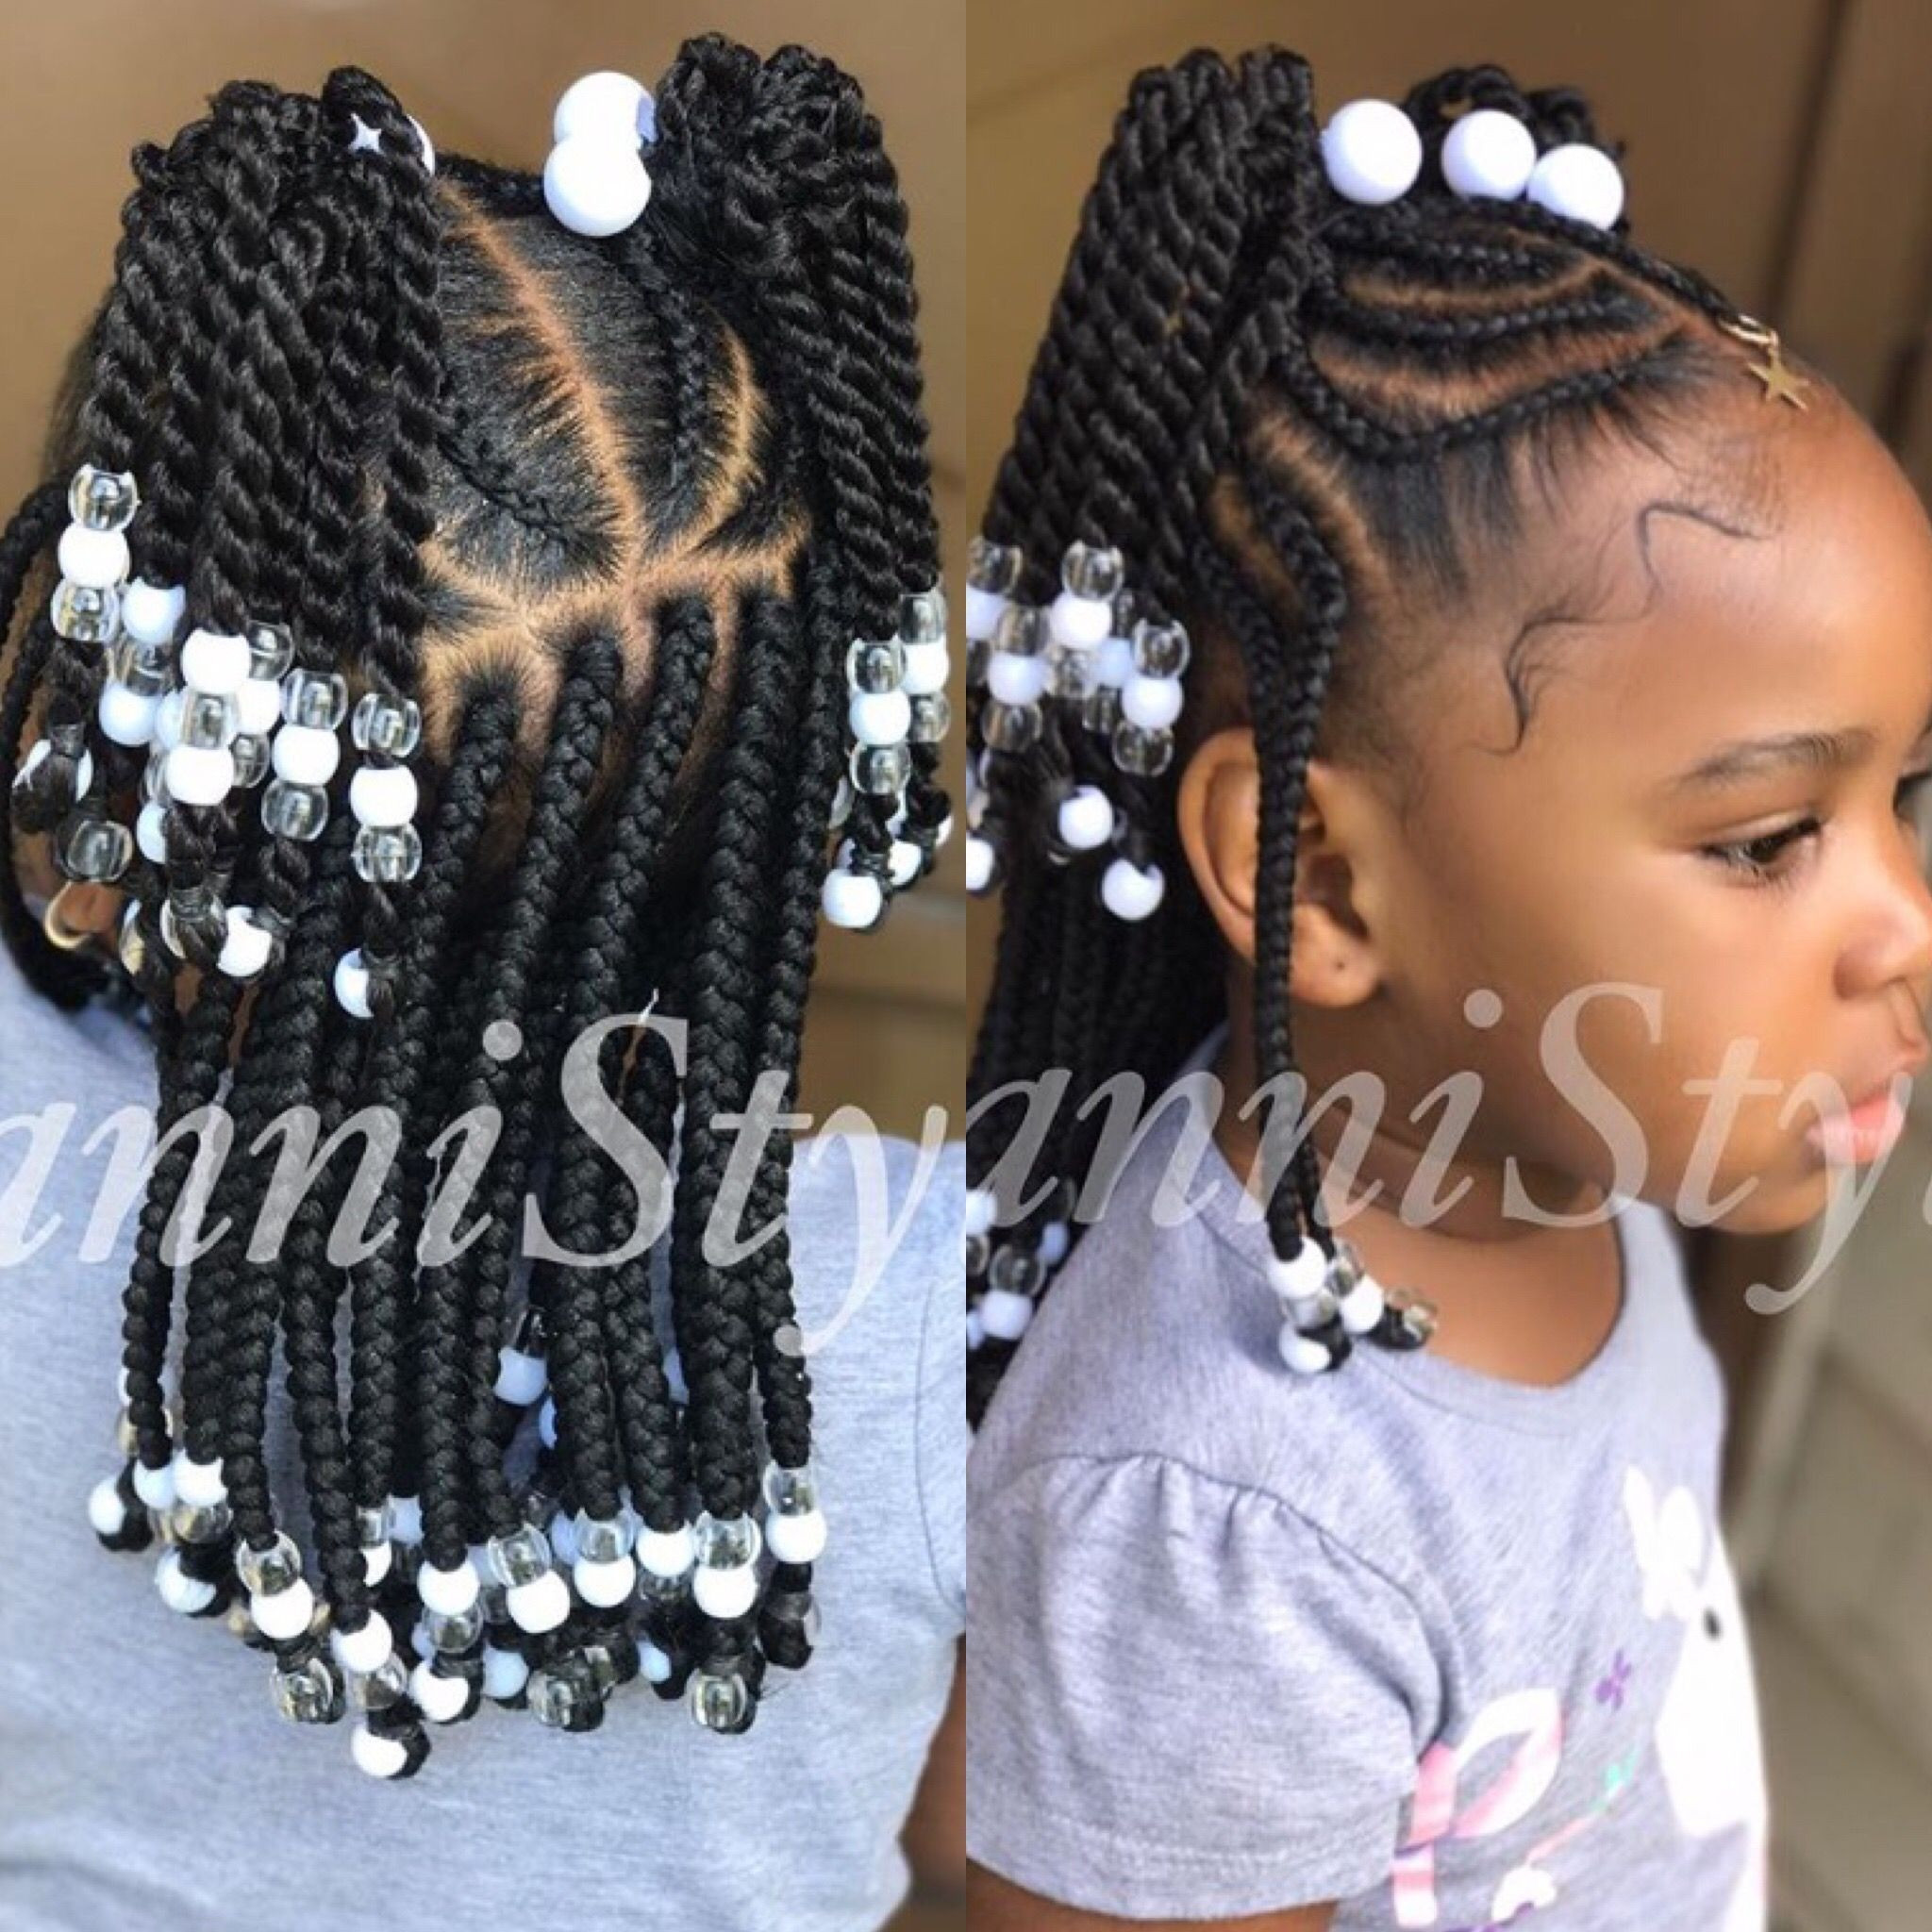 Lil Black Kids Hairstyles
 I love this